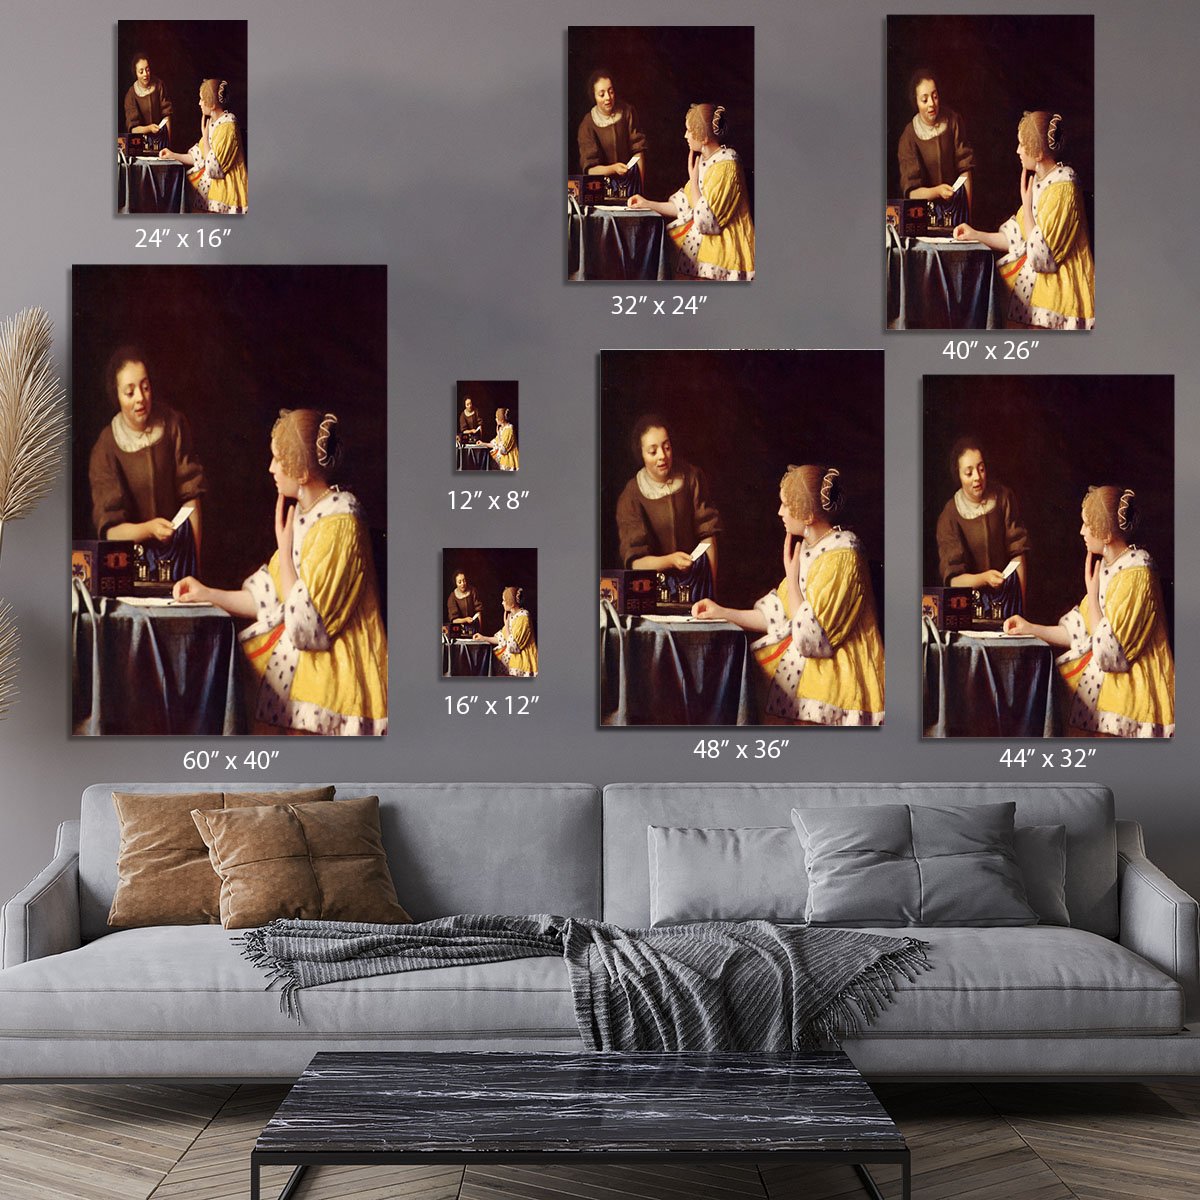 Mistress and maid by Vermeer Canvas Print or Poster